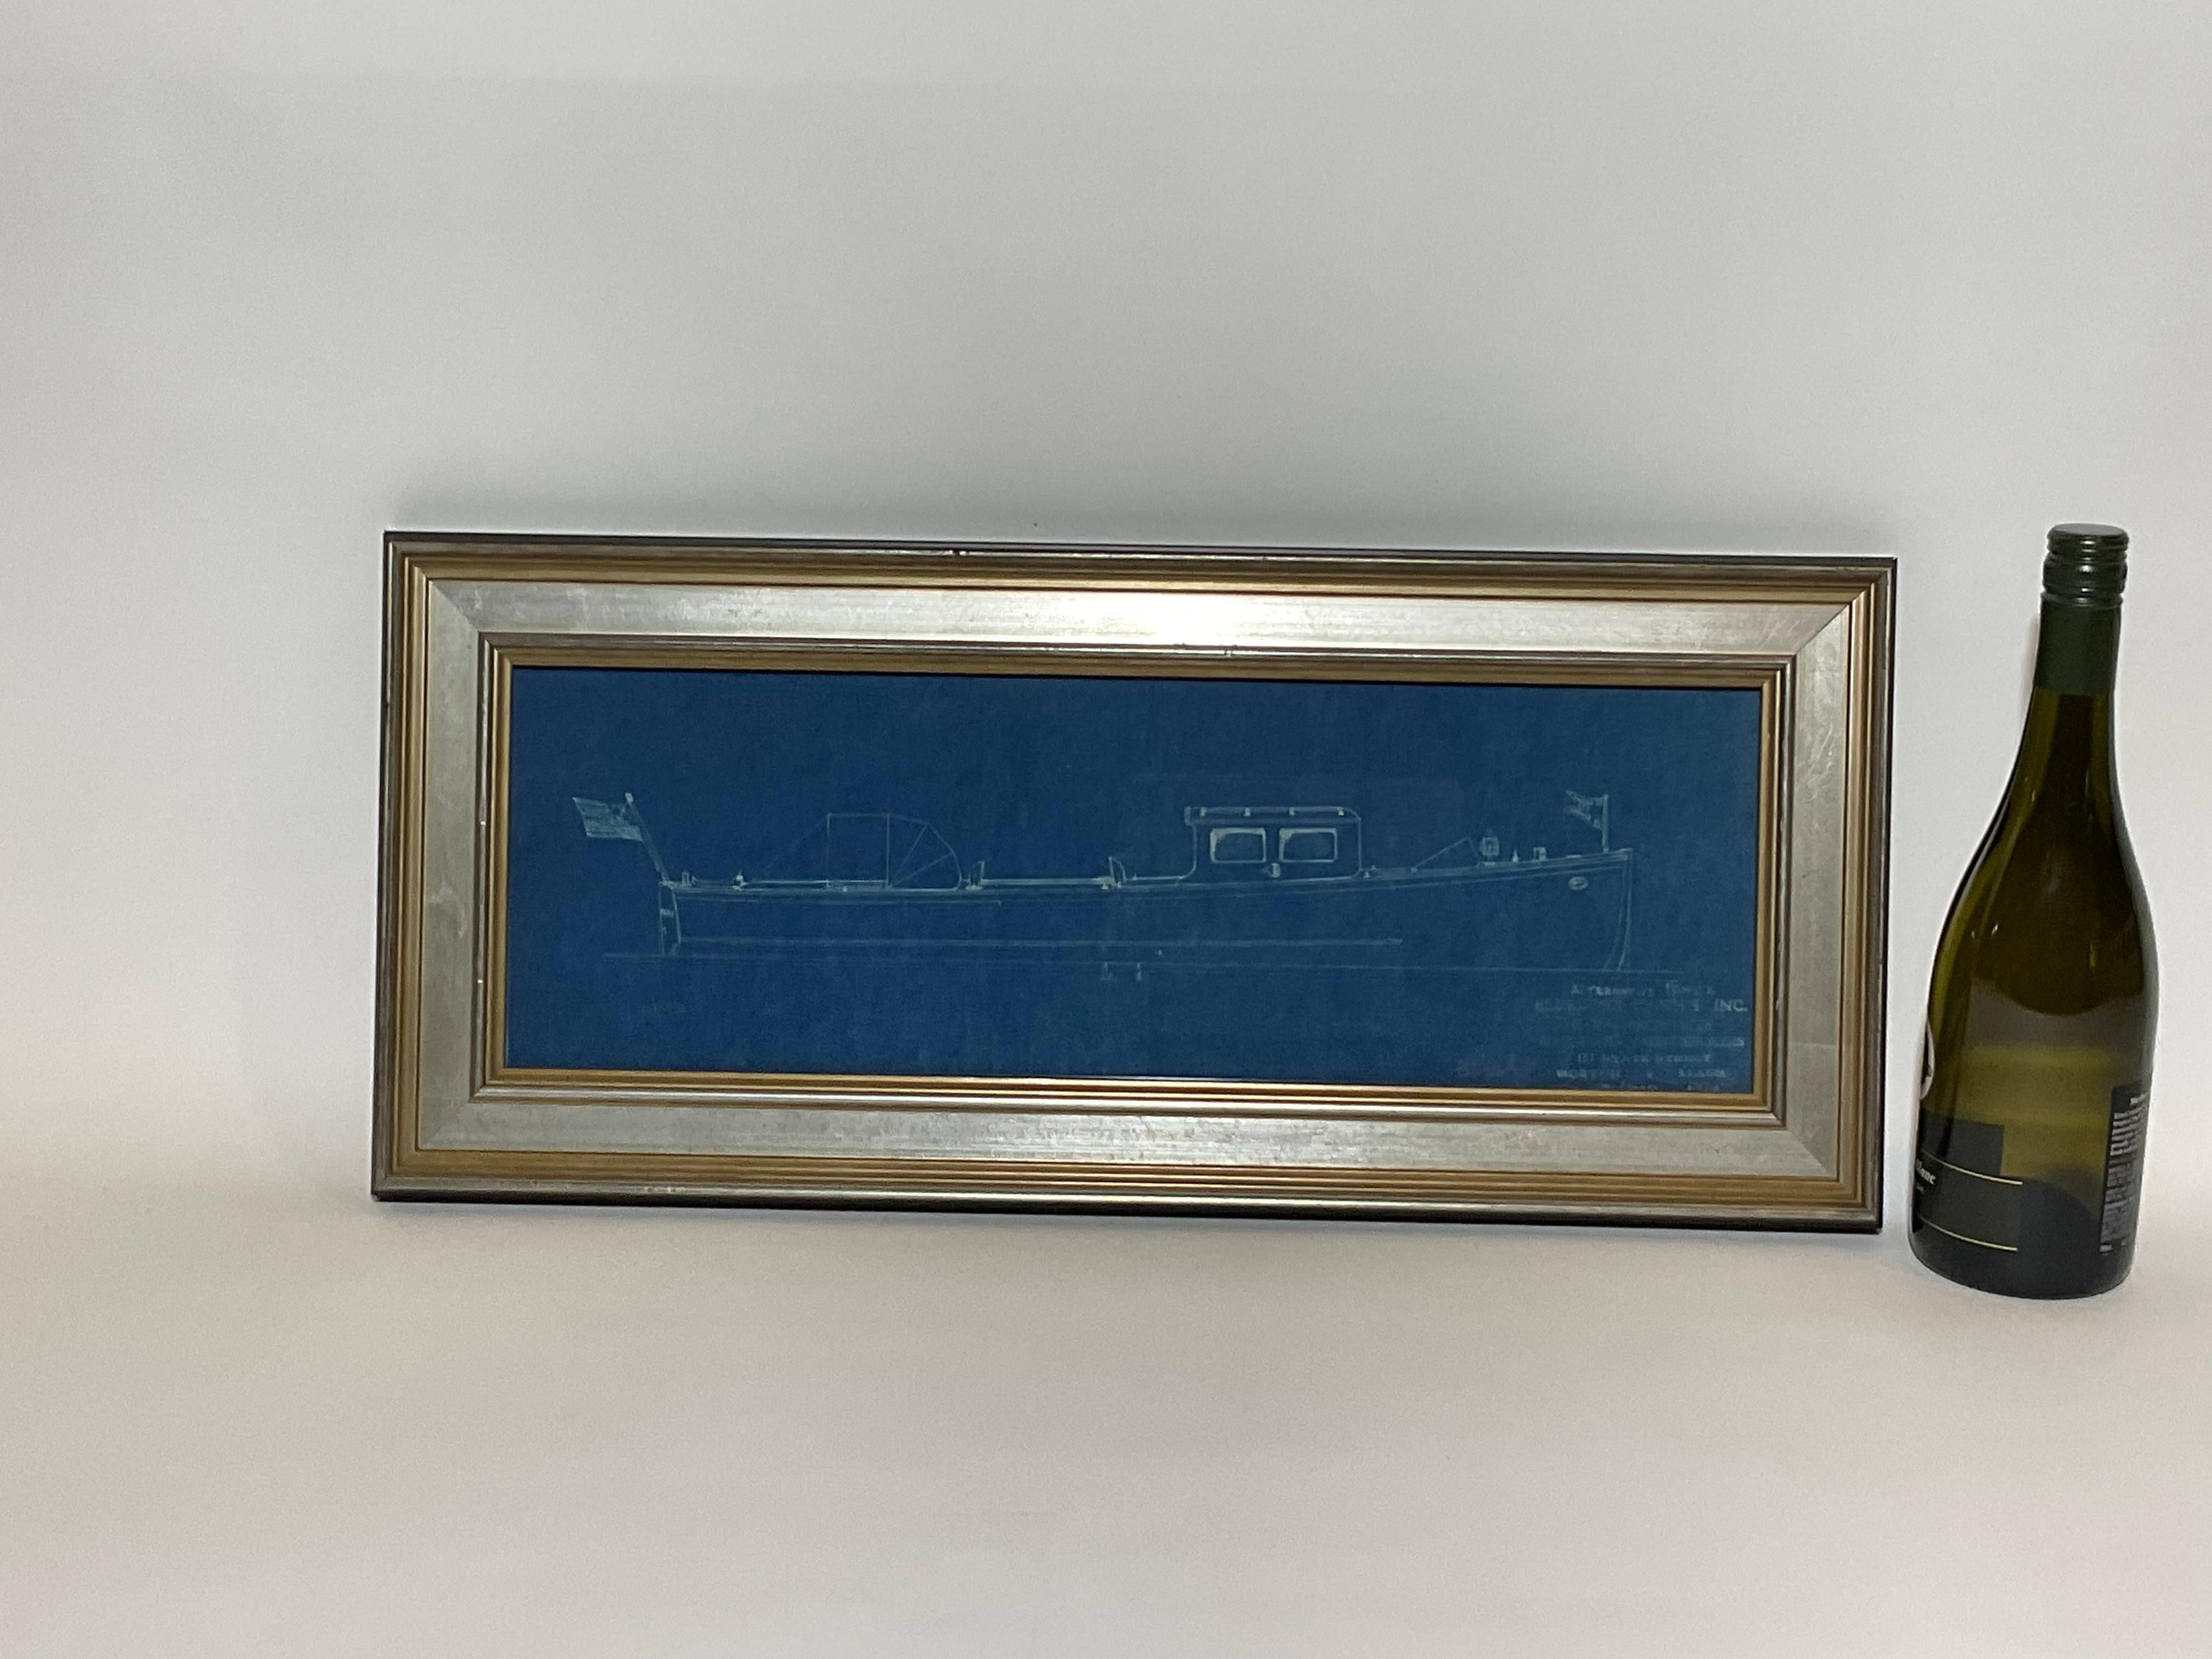 Original blueprint for a motor launch built for the famous steam yacht Hi-Esmaro.

Originally laid down on the 14th November 1928 as the steel hulled yacht Hi-Esmaro by Bath Iron Works, Bath, Maine. Launched 7th June 1929 & Delivered 20th August